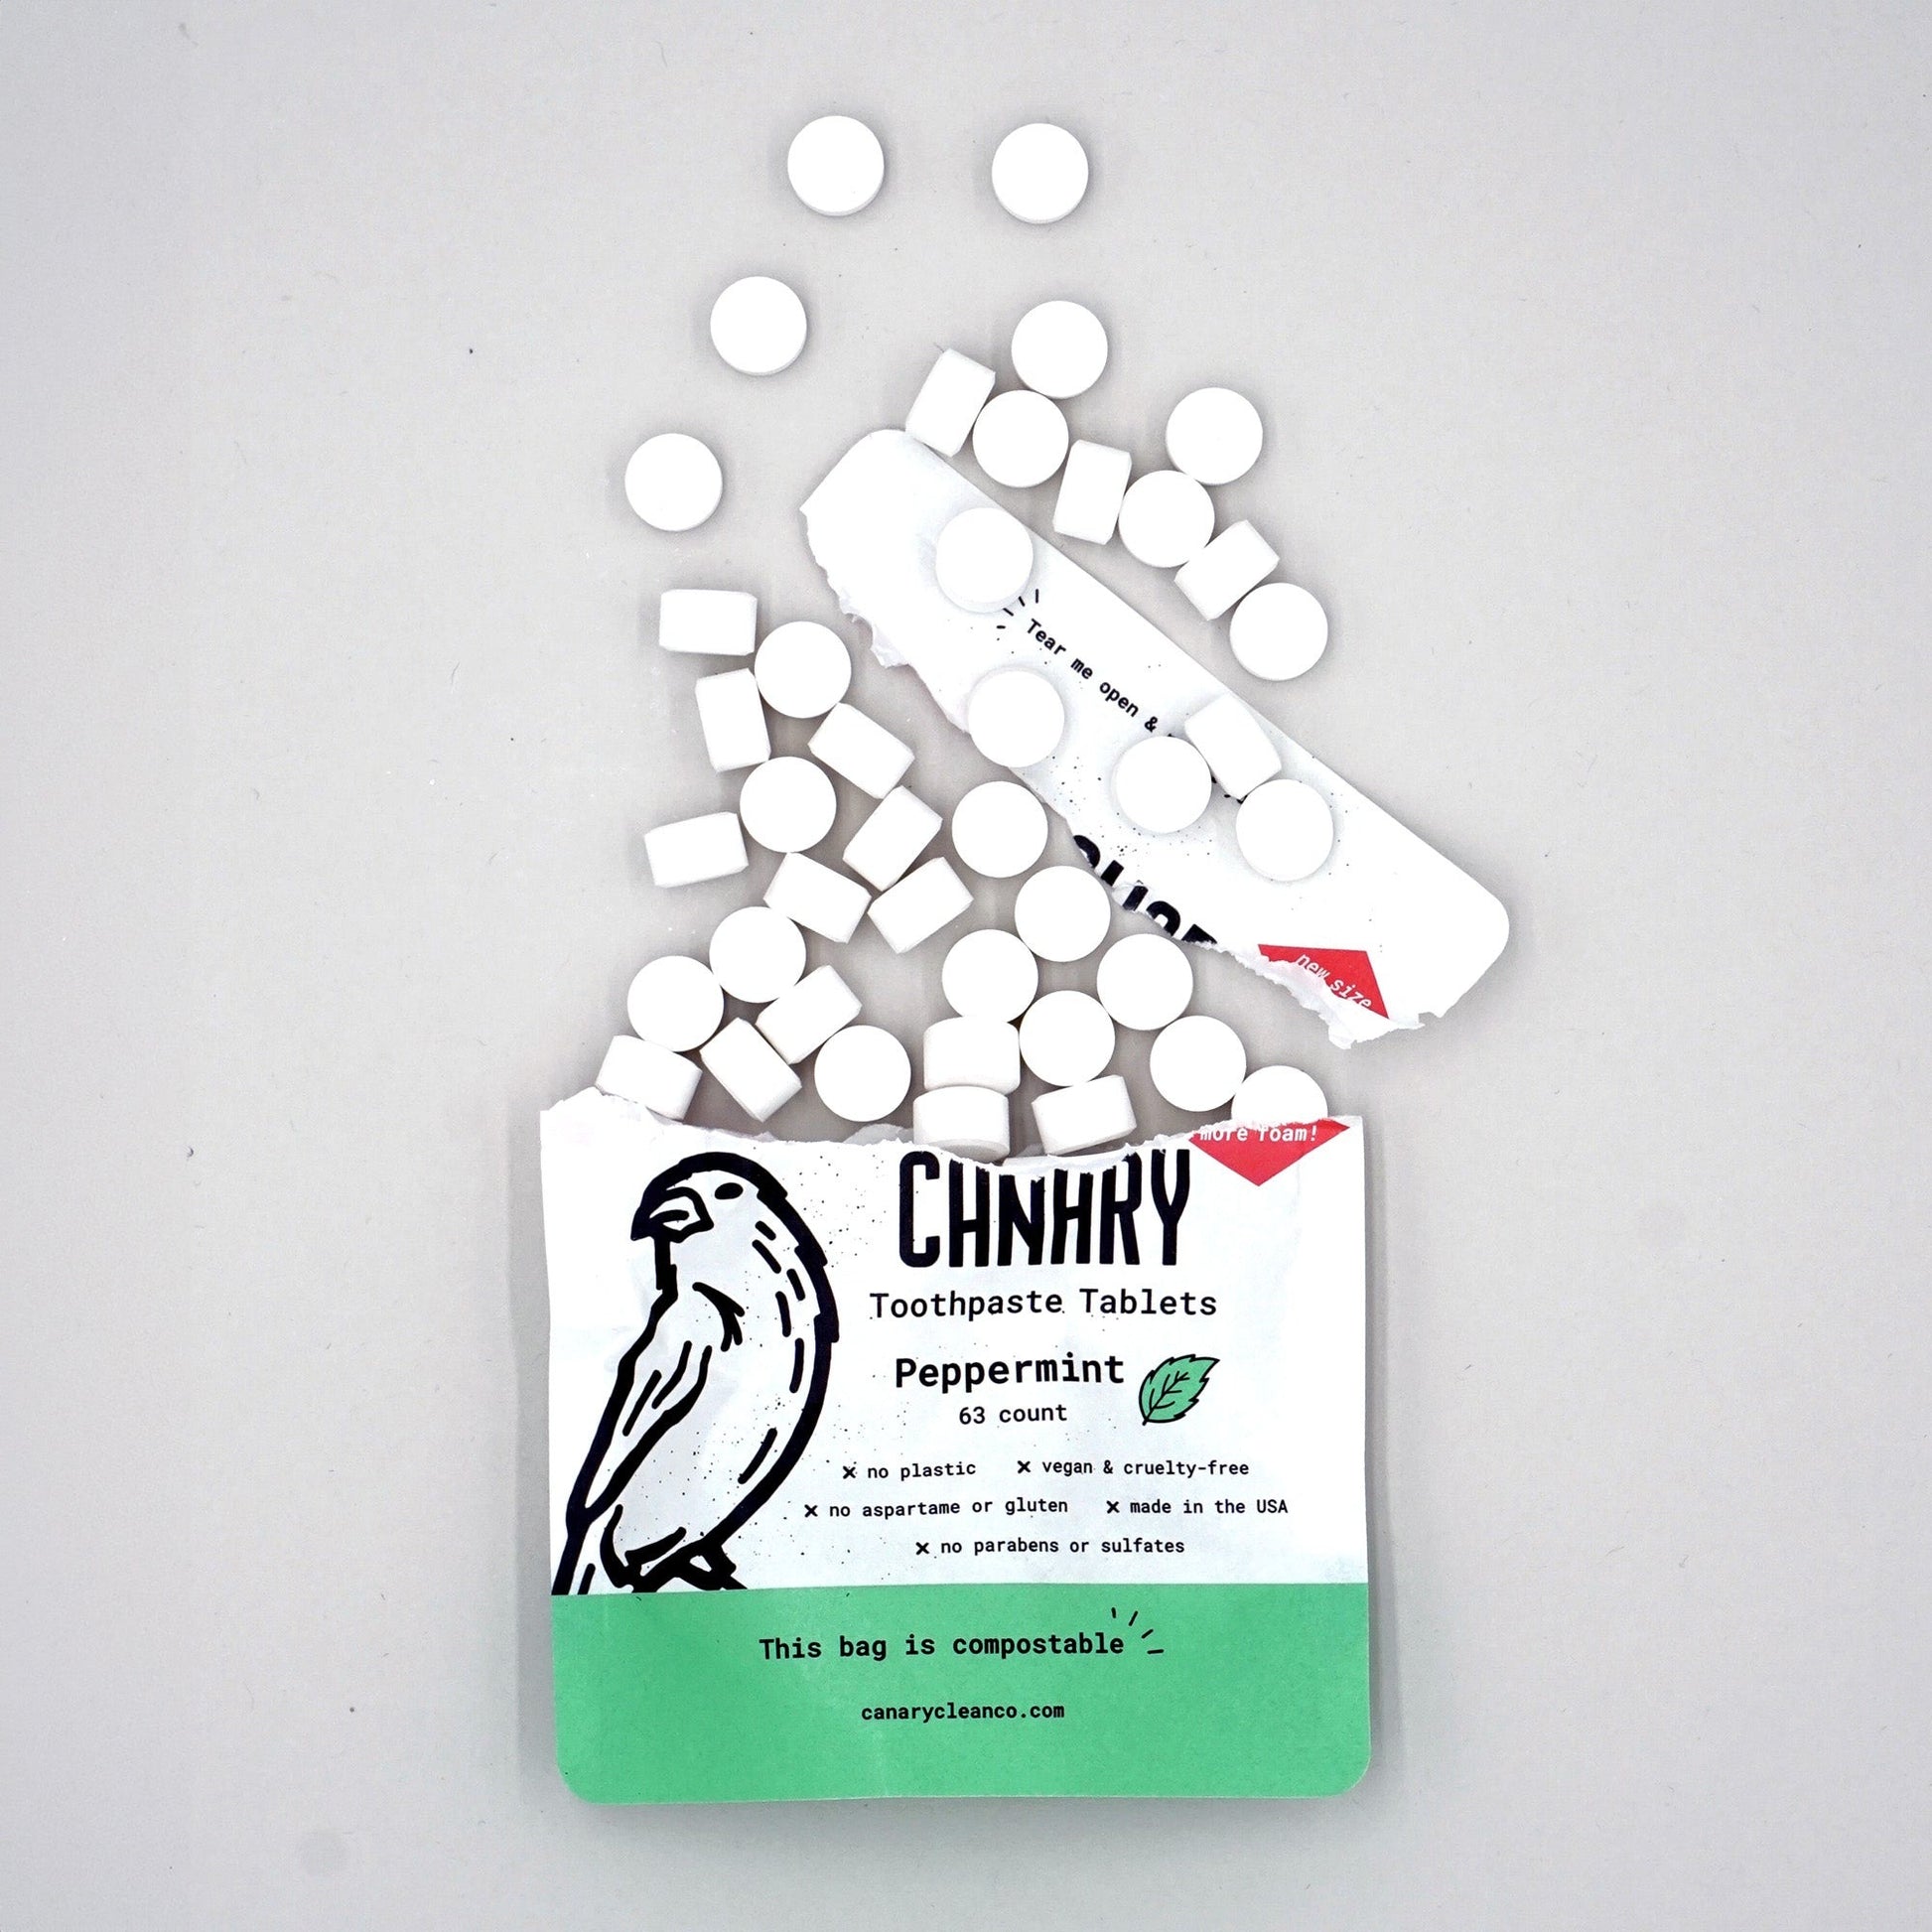 New and improved Canary Peppermint Toothpaste Tablets, spill of 63ct compostable pouch